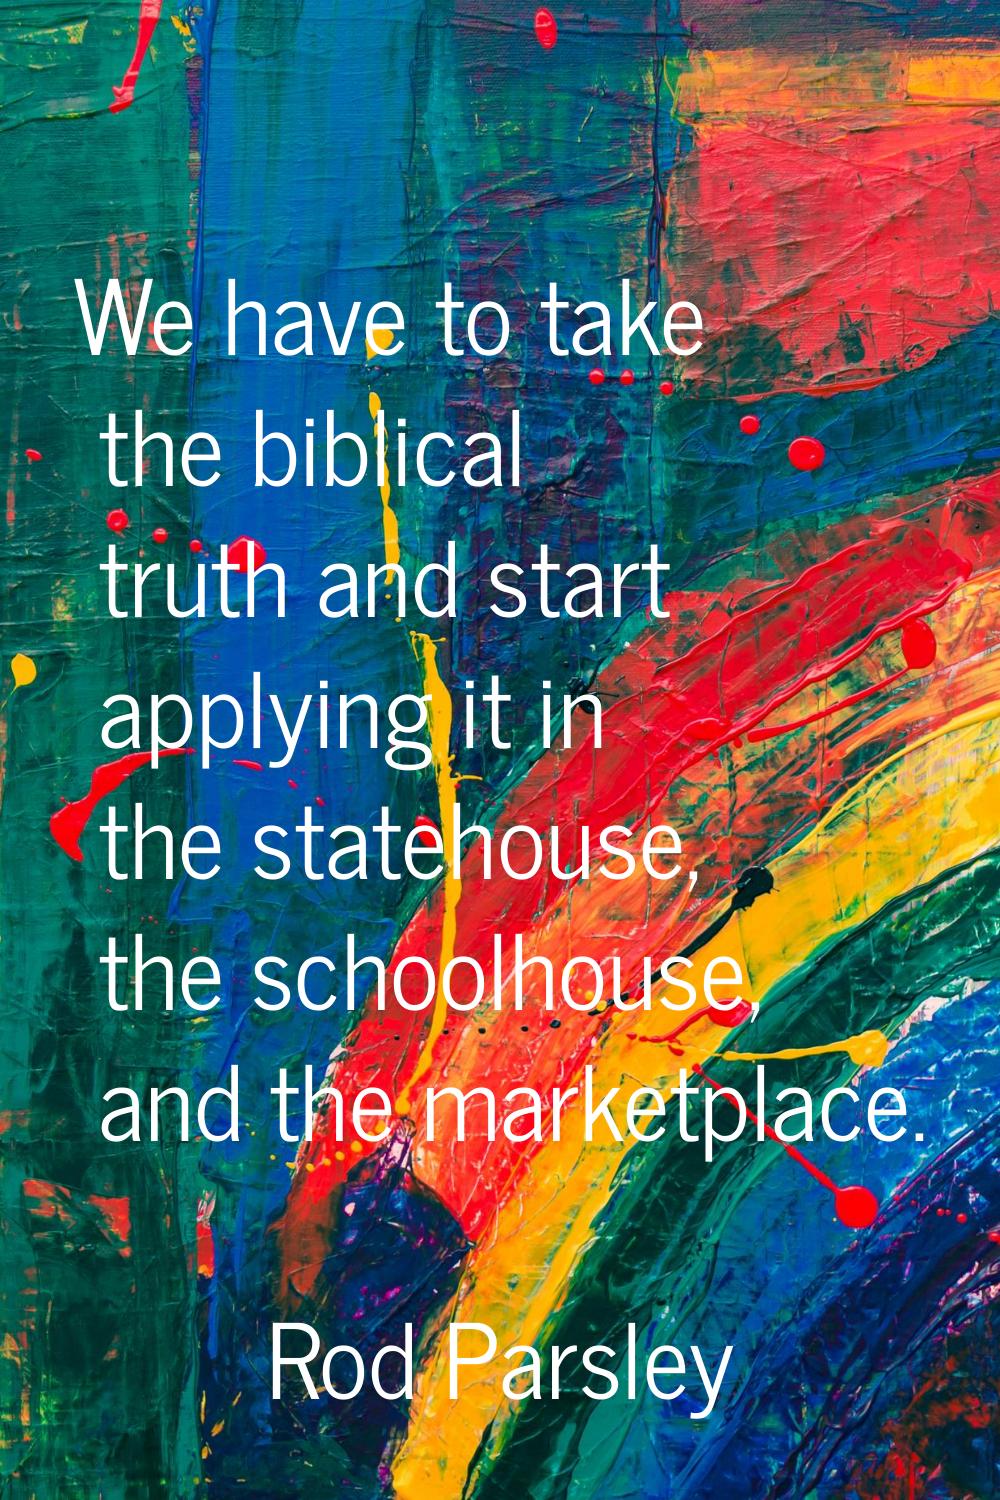 We have to take the biblical truth and start applying it in the statehouse, the schoolhouse, and th